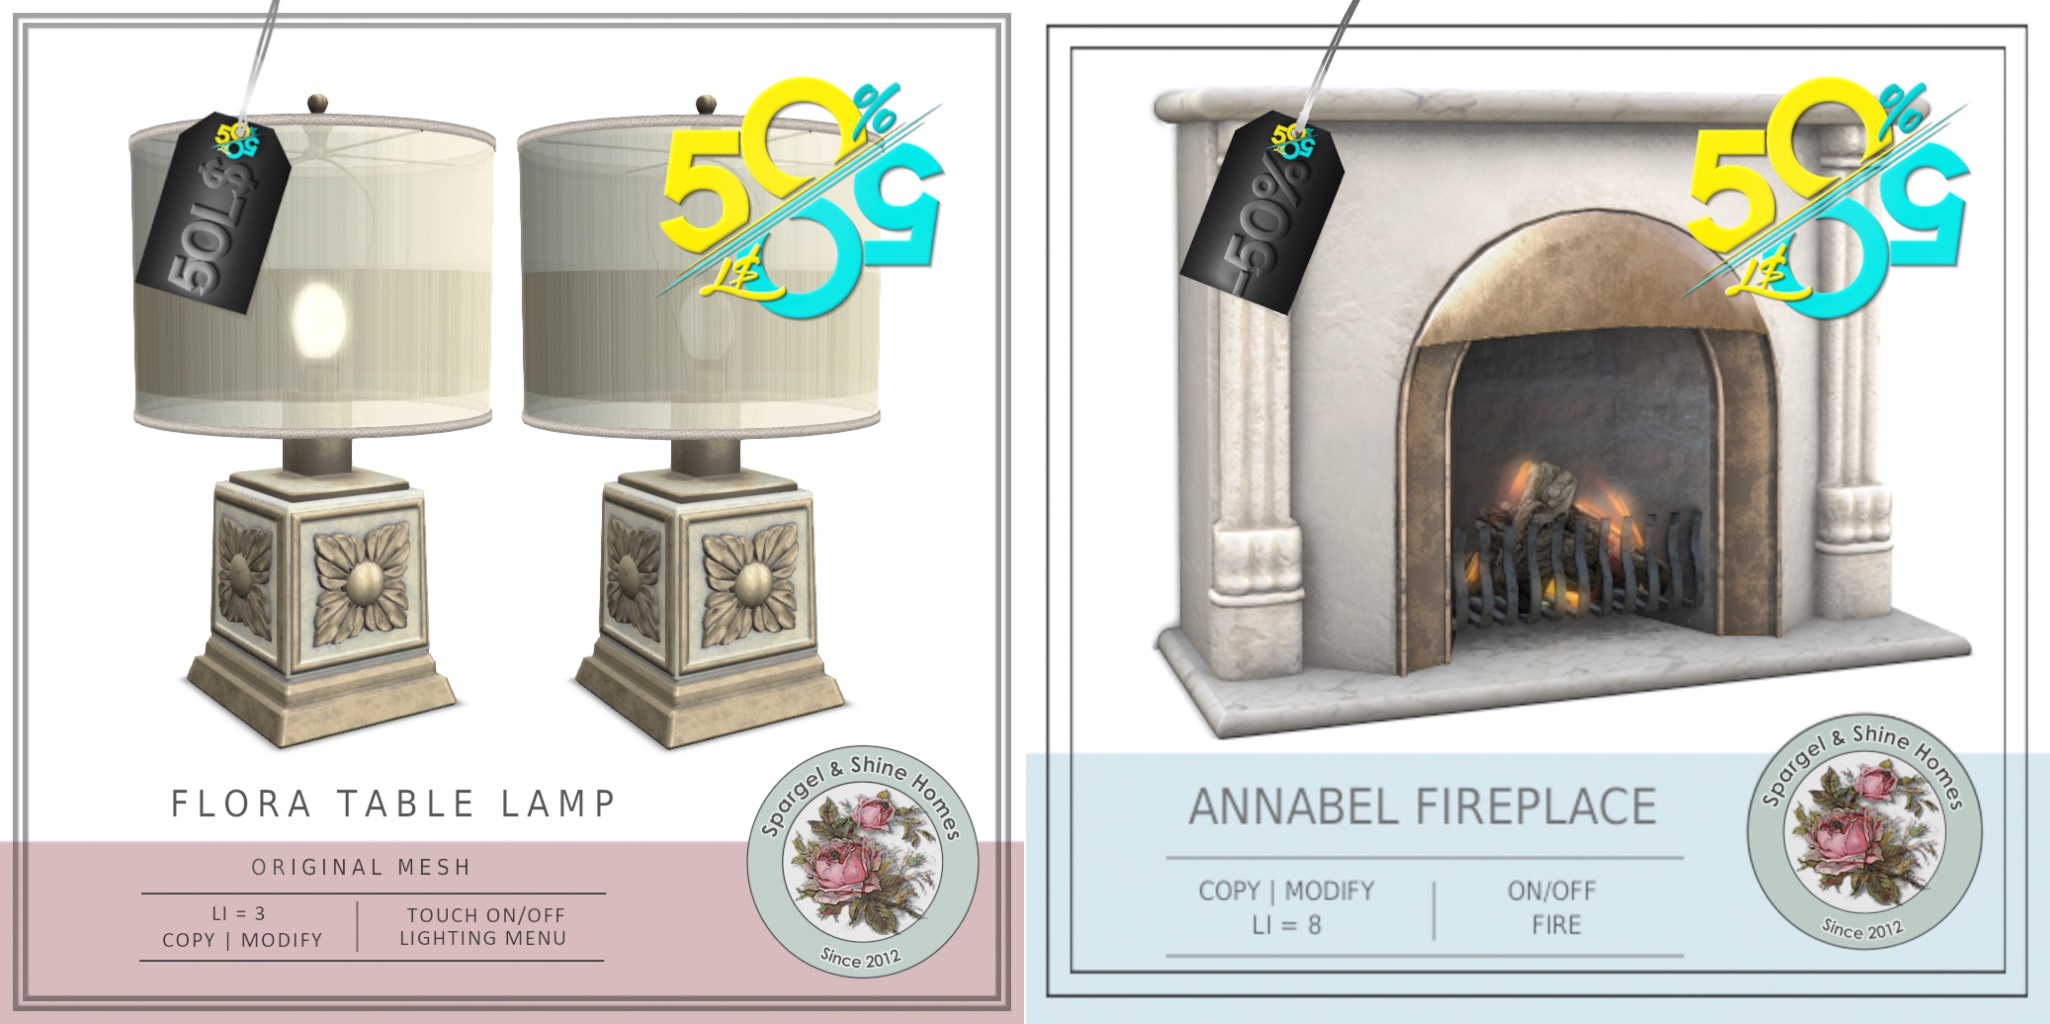 Spargel & Shine – Flora Table Lamp & Annabel Fireplace